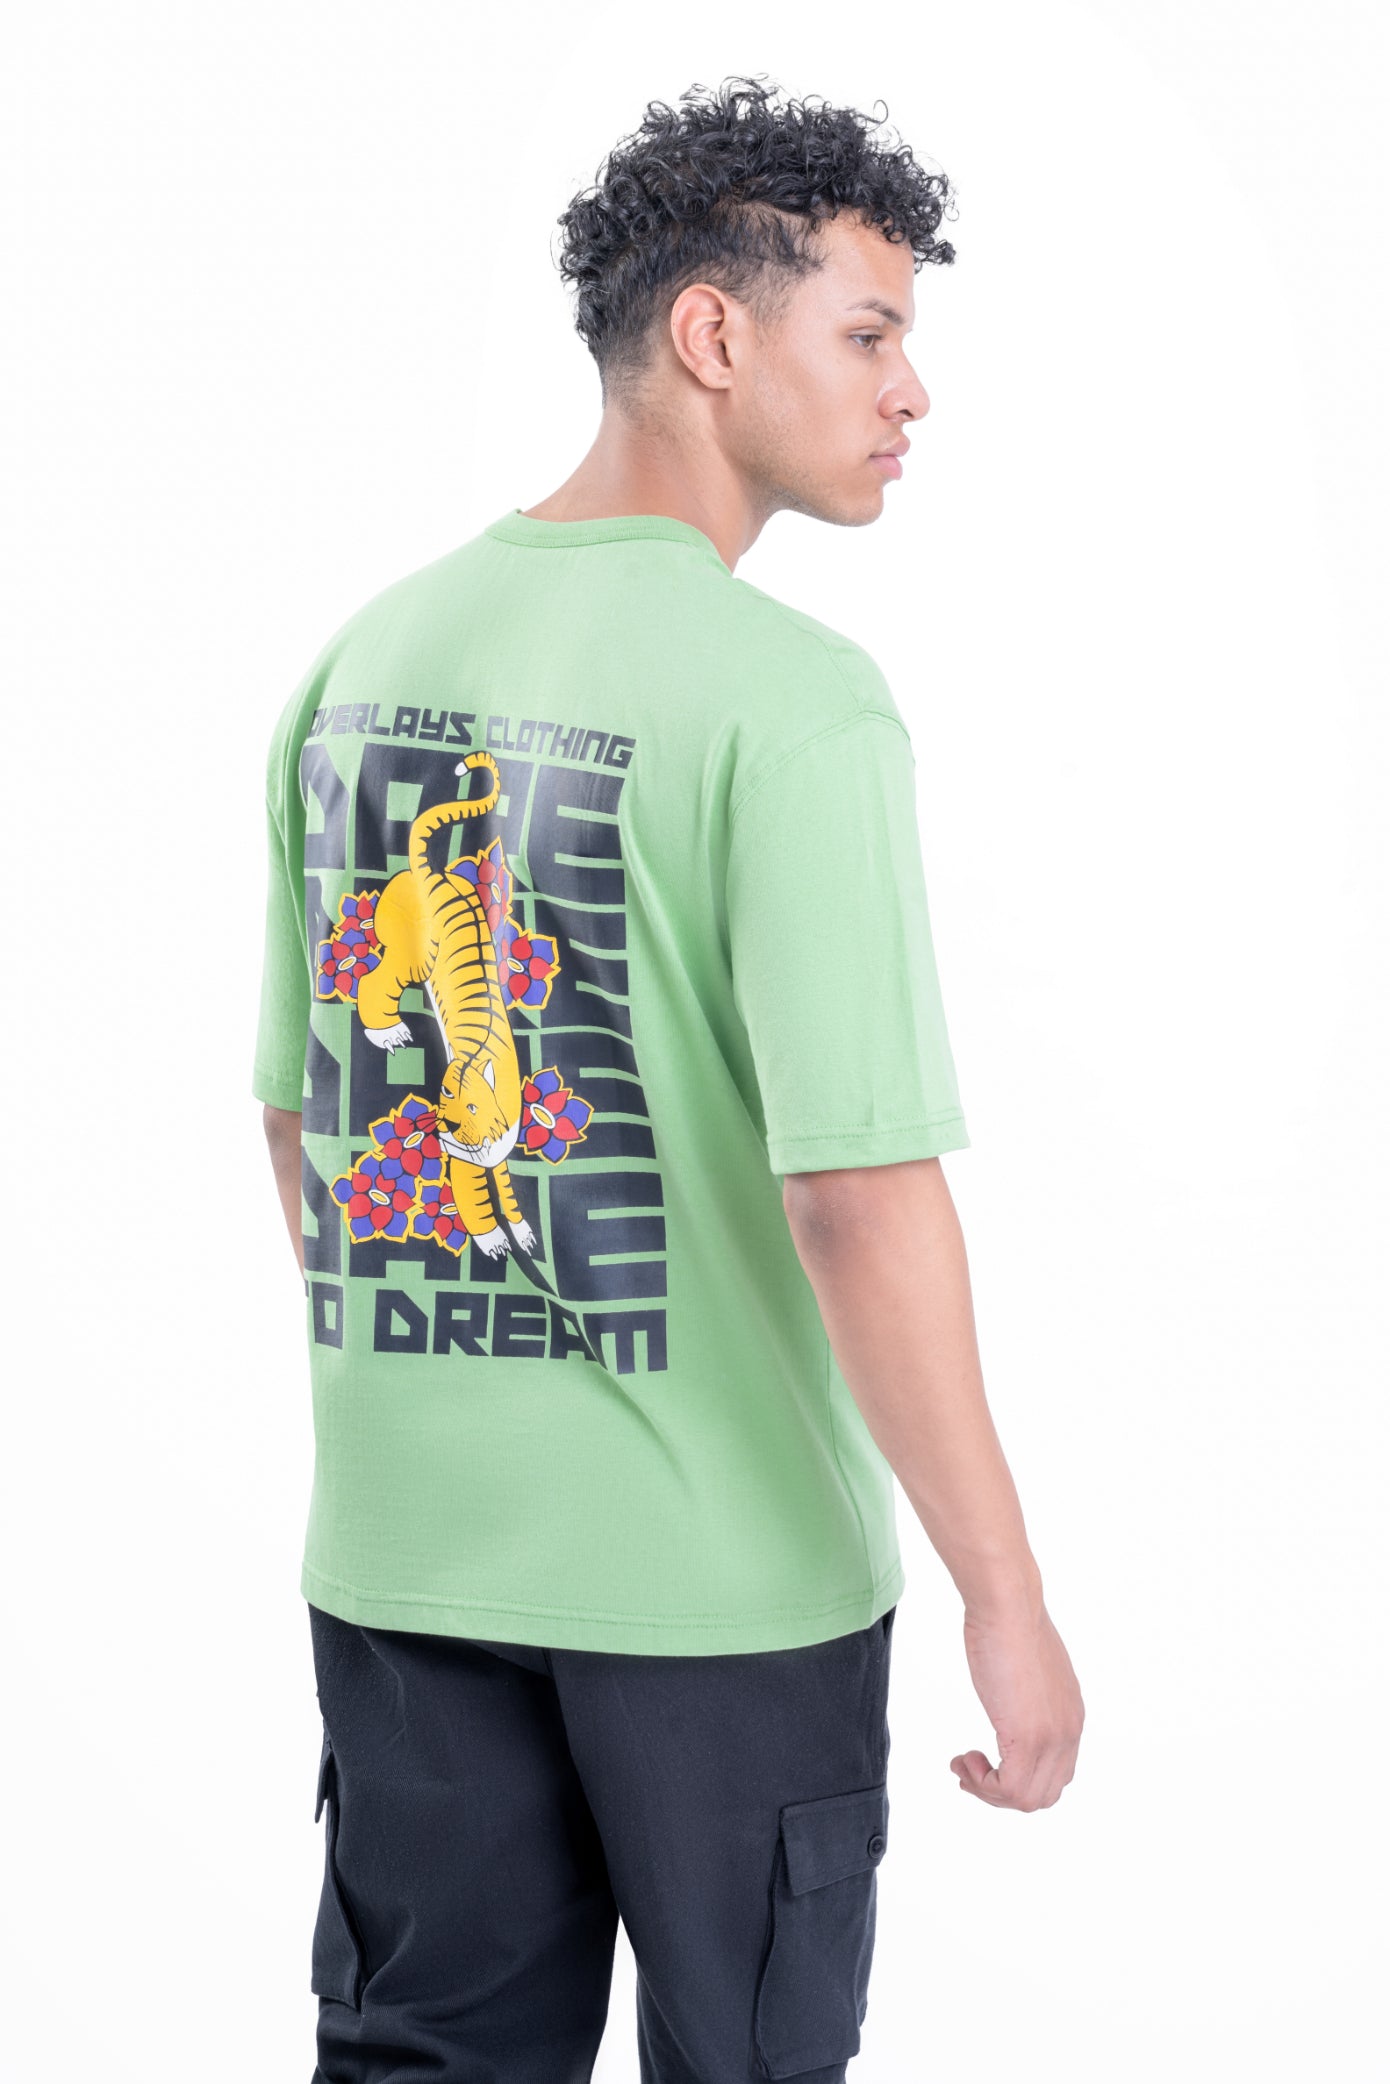 Relaxed Fit Men's Dare To Dream Tshirt - Green